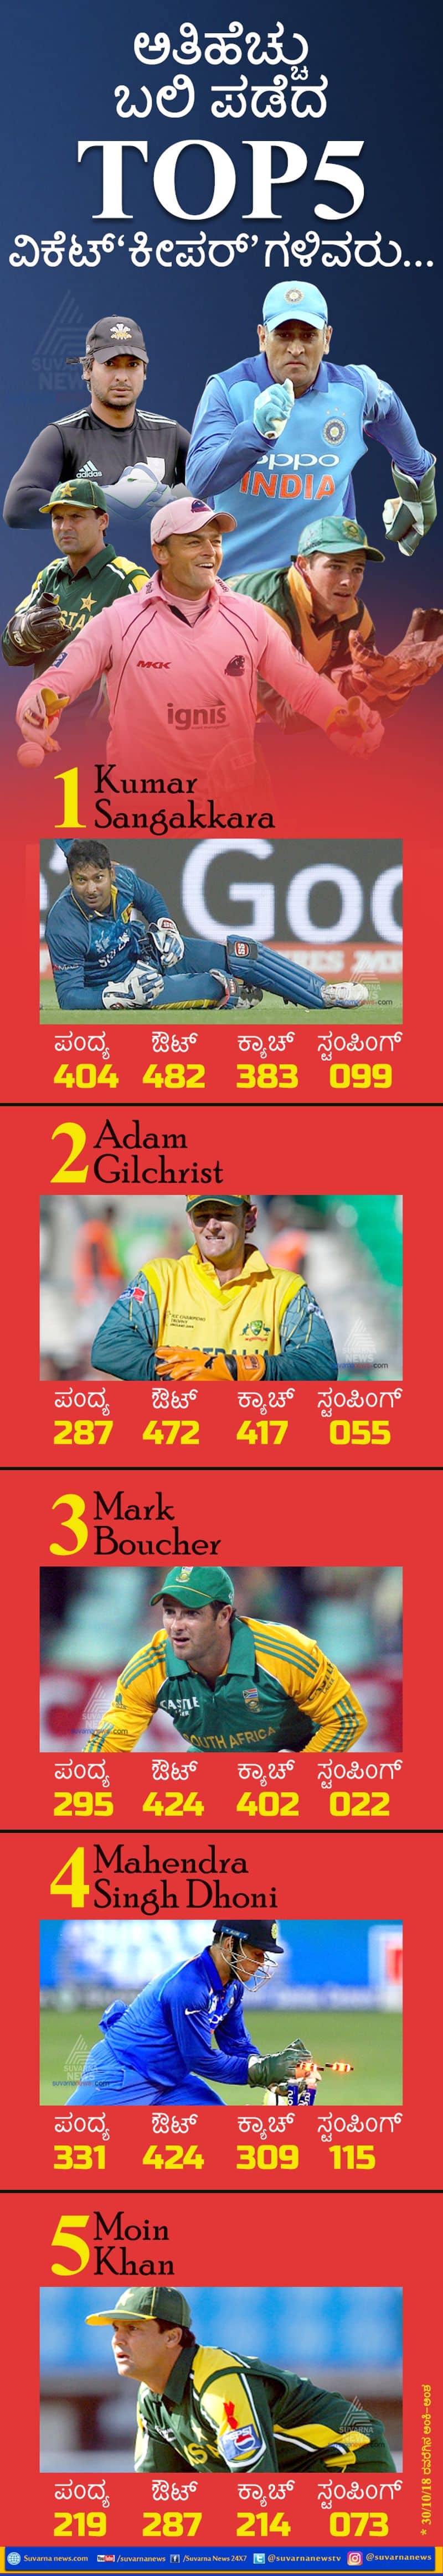 Top 5 wicket keepers with most dismissal in ODIs Cricket